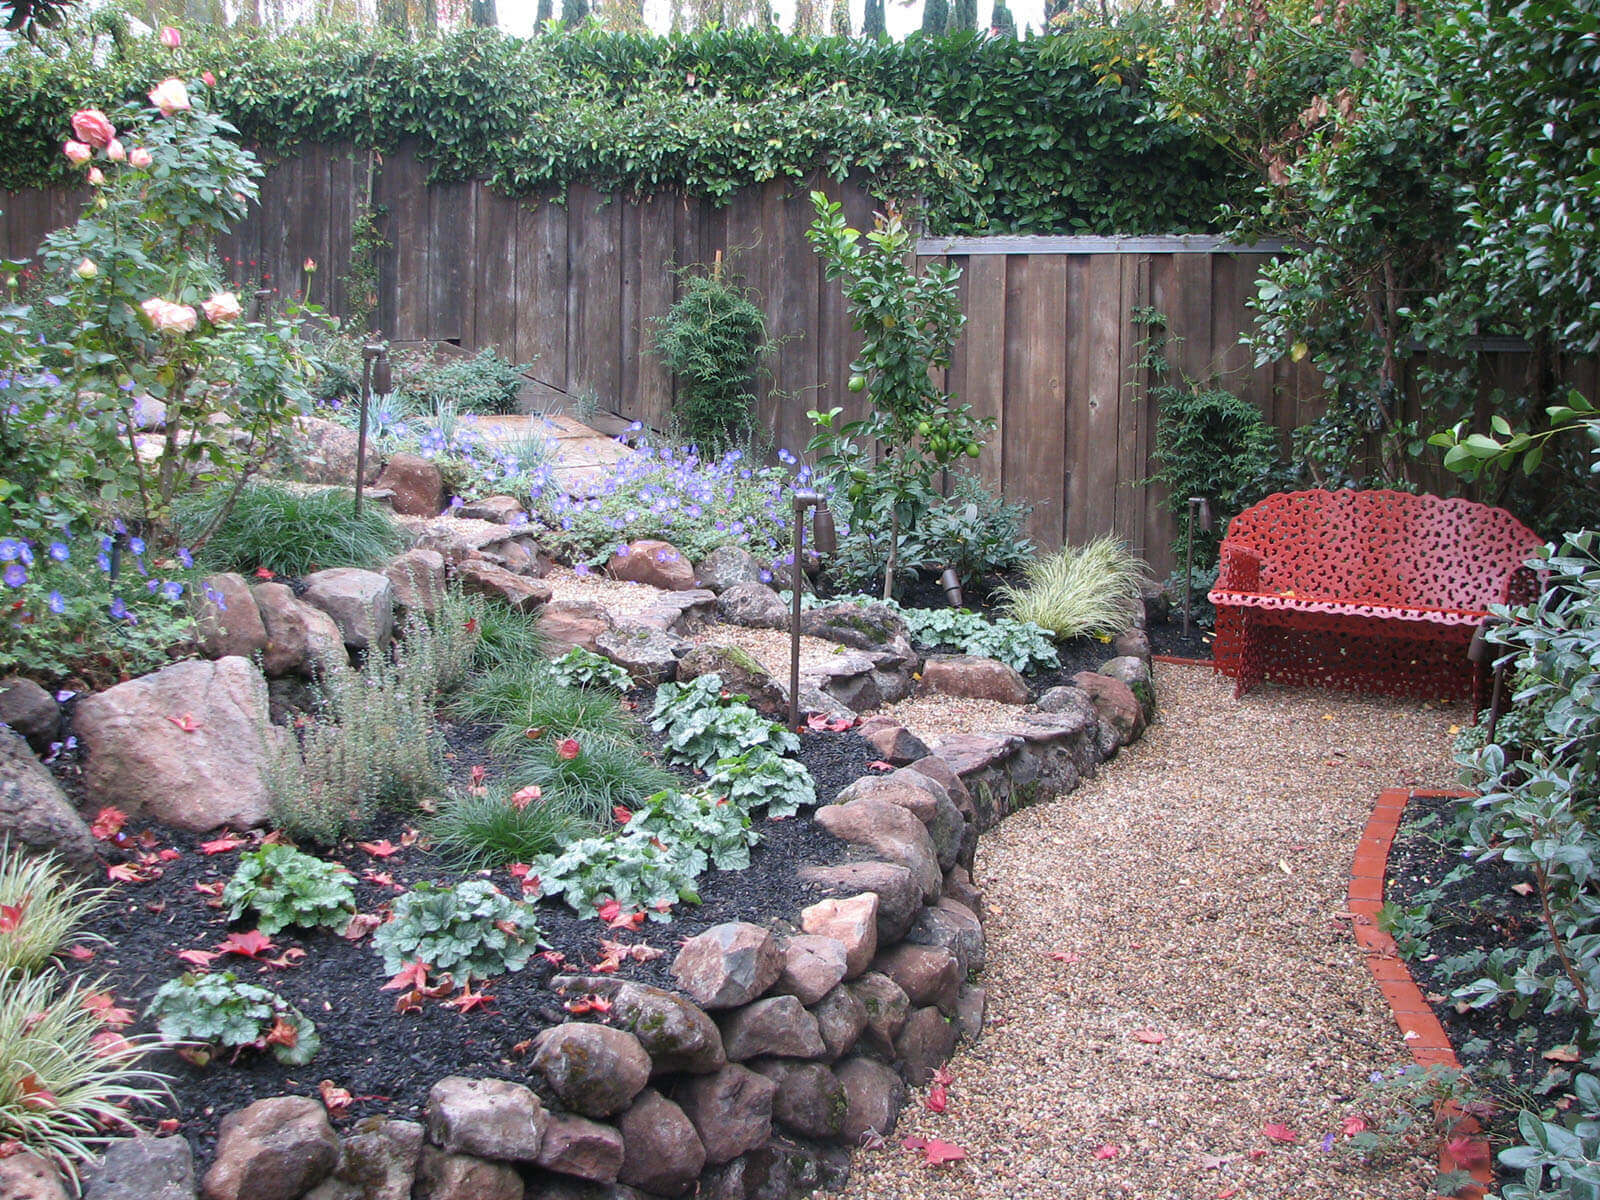 Hillside - gravel and rock walkway with staged garden beds and accented metal outdoor furniture